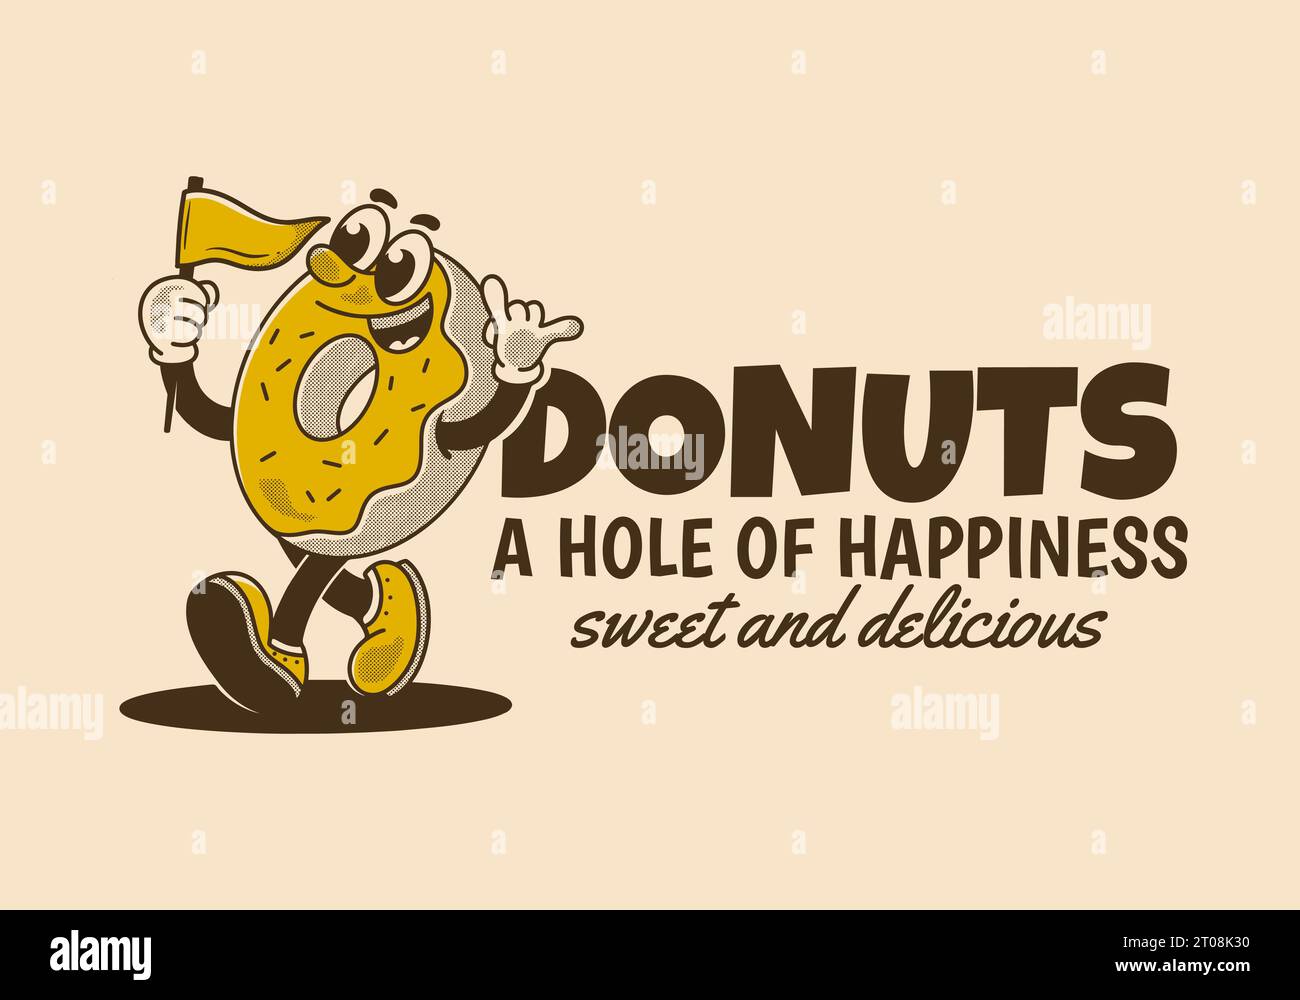 Donuts, a hole of happiness. Vintage mascot character illustration of walking donuts holding a flag Stock Vector